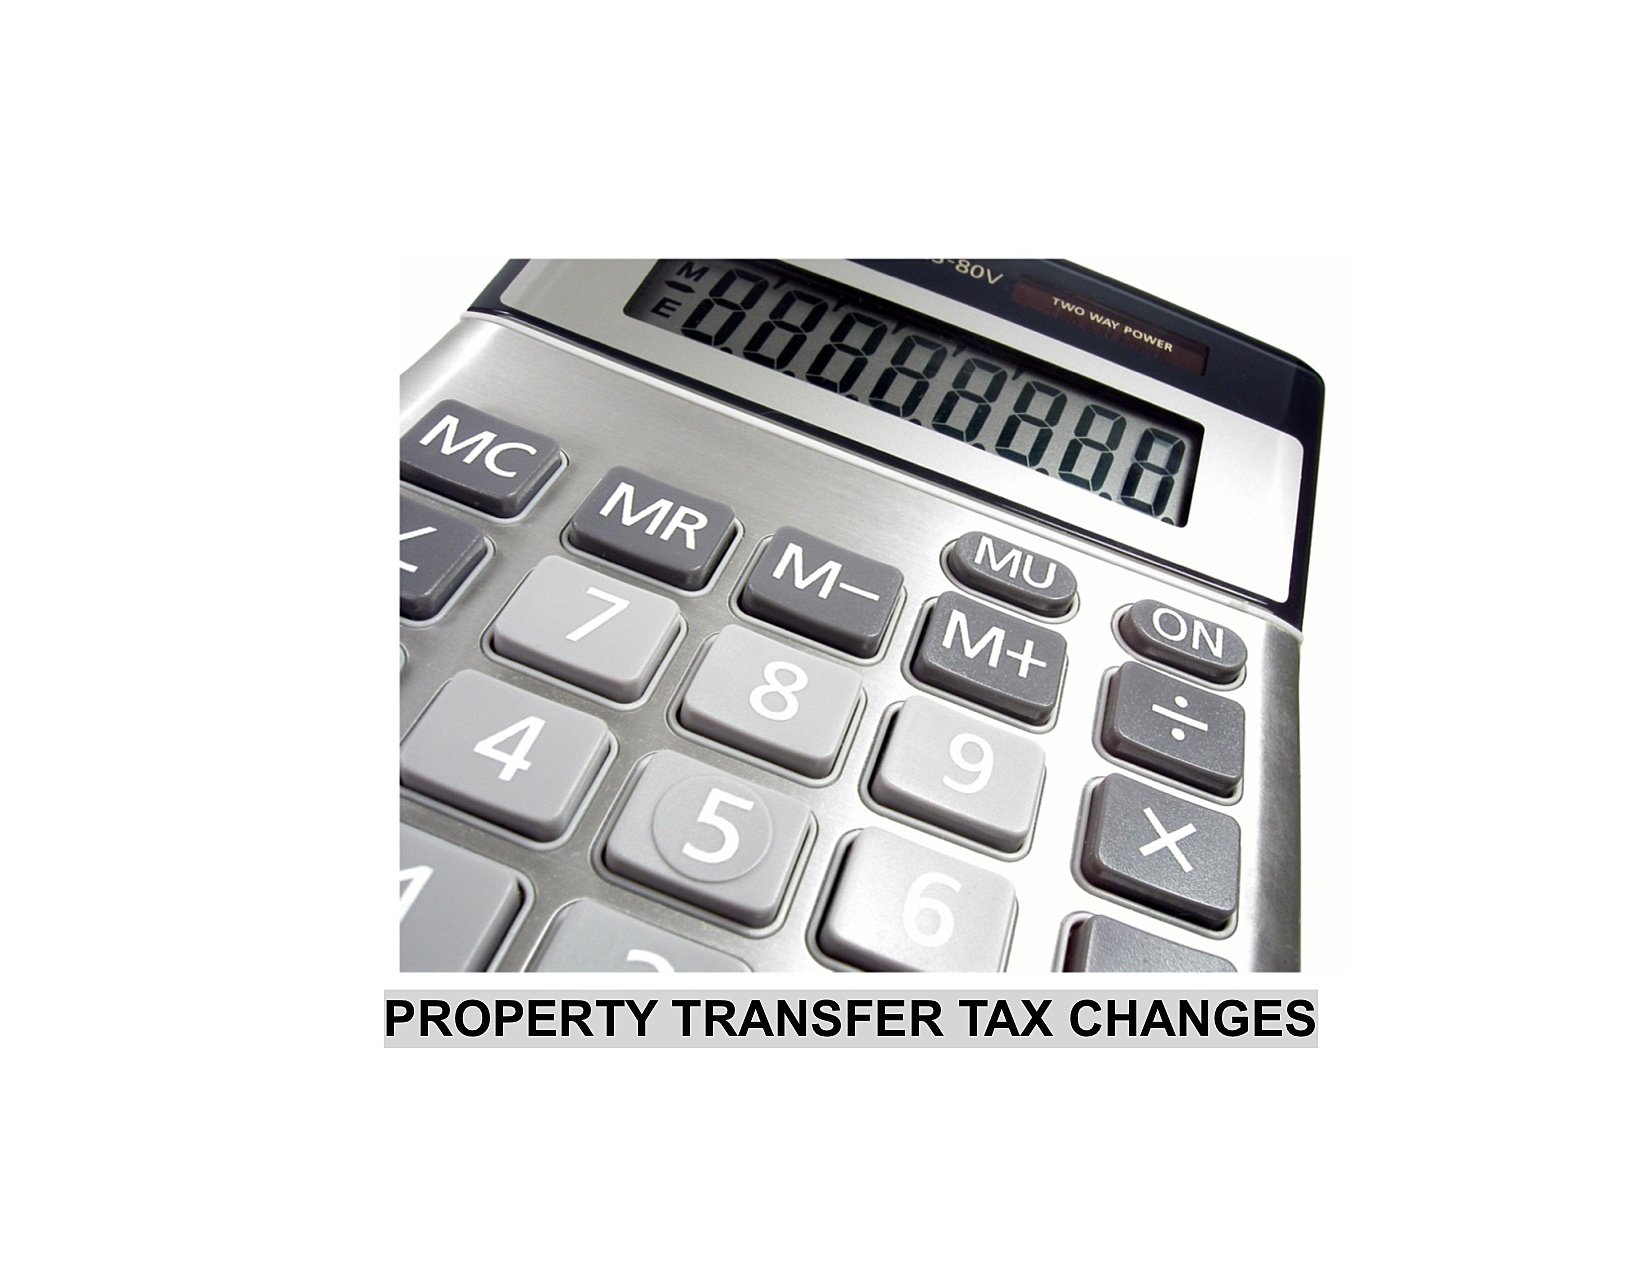 bc first time home buyer property transfer tax calculator